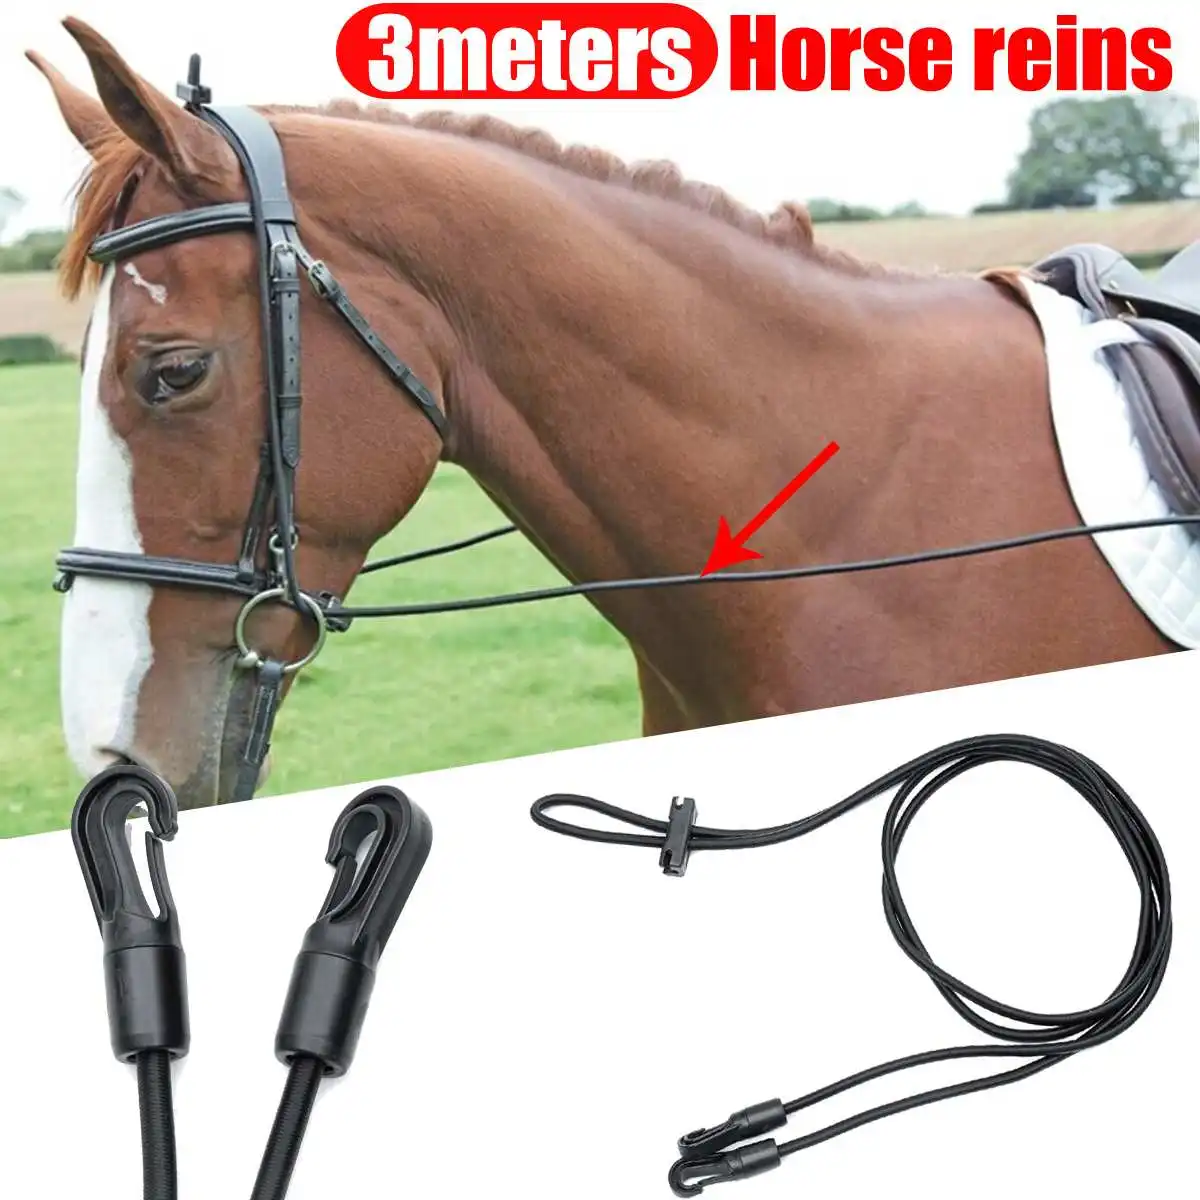 

3 Meters High Stretch Nylon Black Portable Horse Bridle Reins Head Collar Rope Halter Horse Riding Equipment Control Attachment